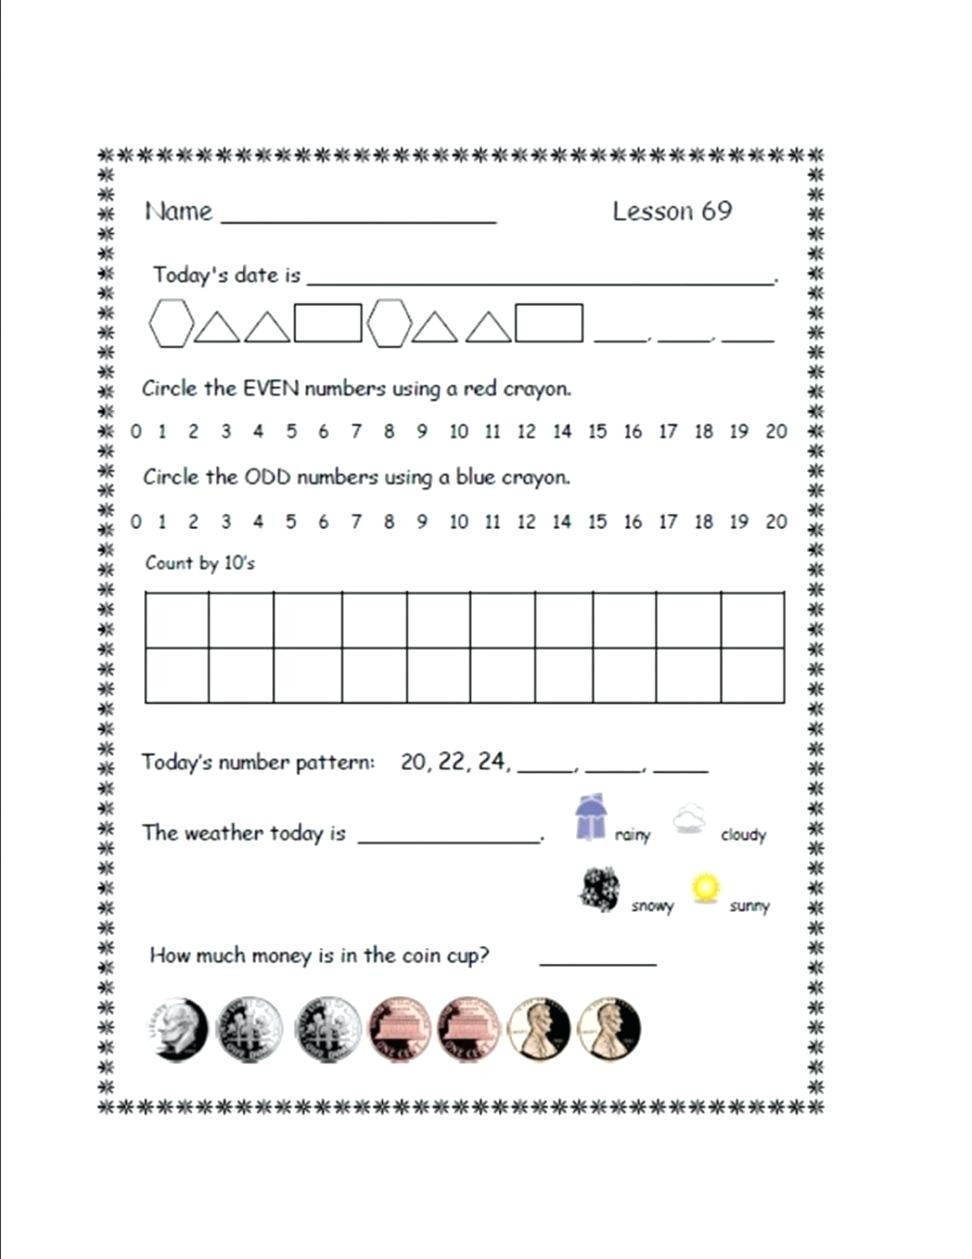 Fun Math Worksheets For Middle School db excel com